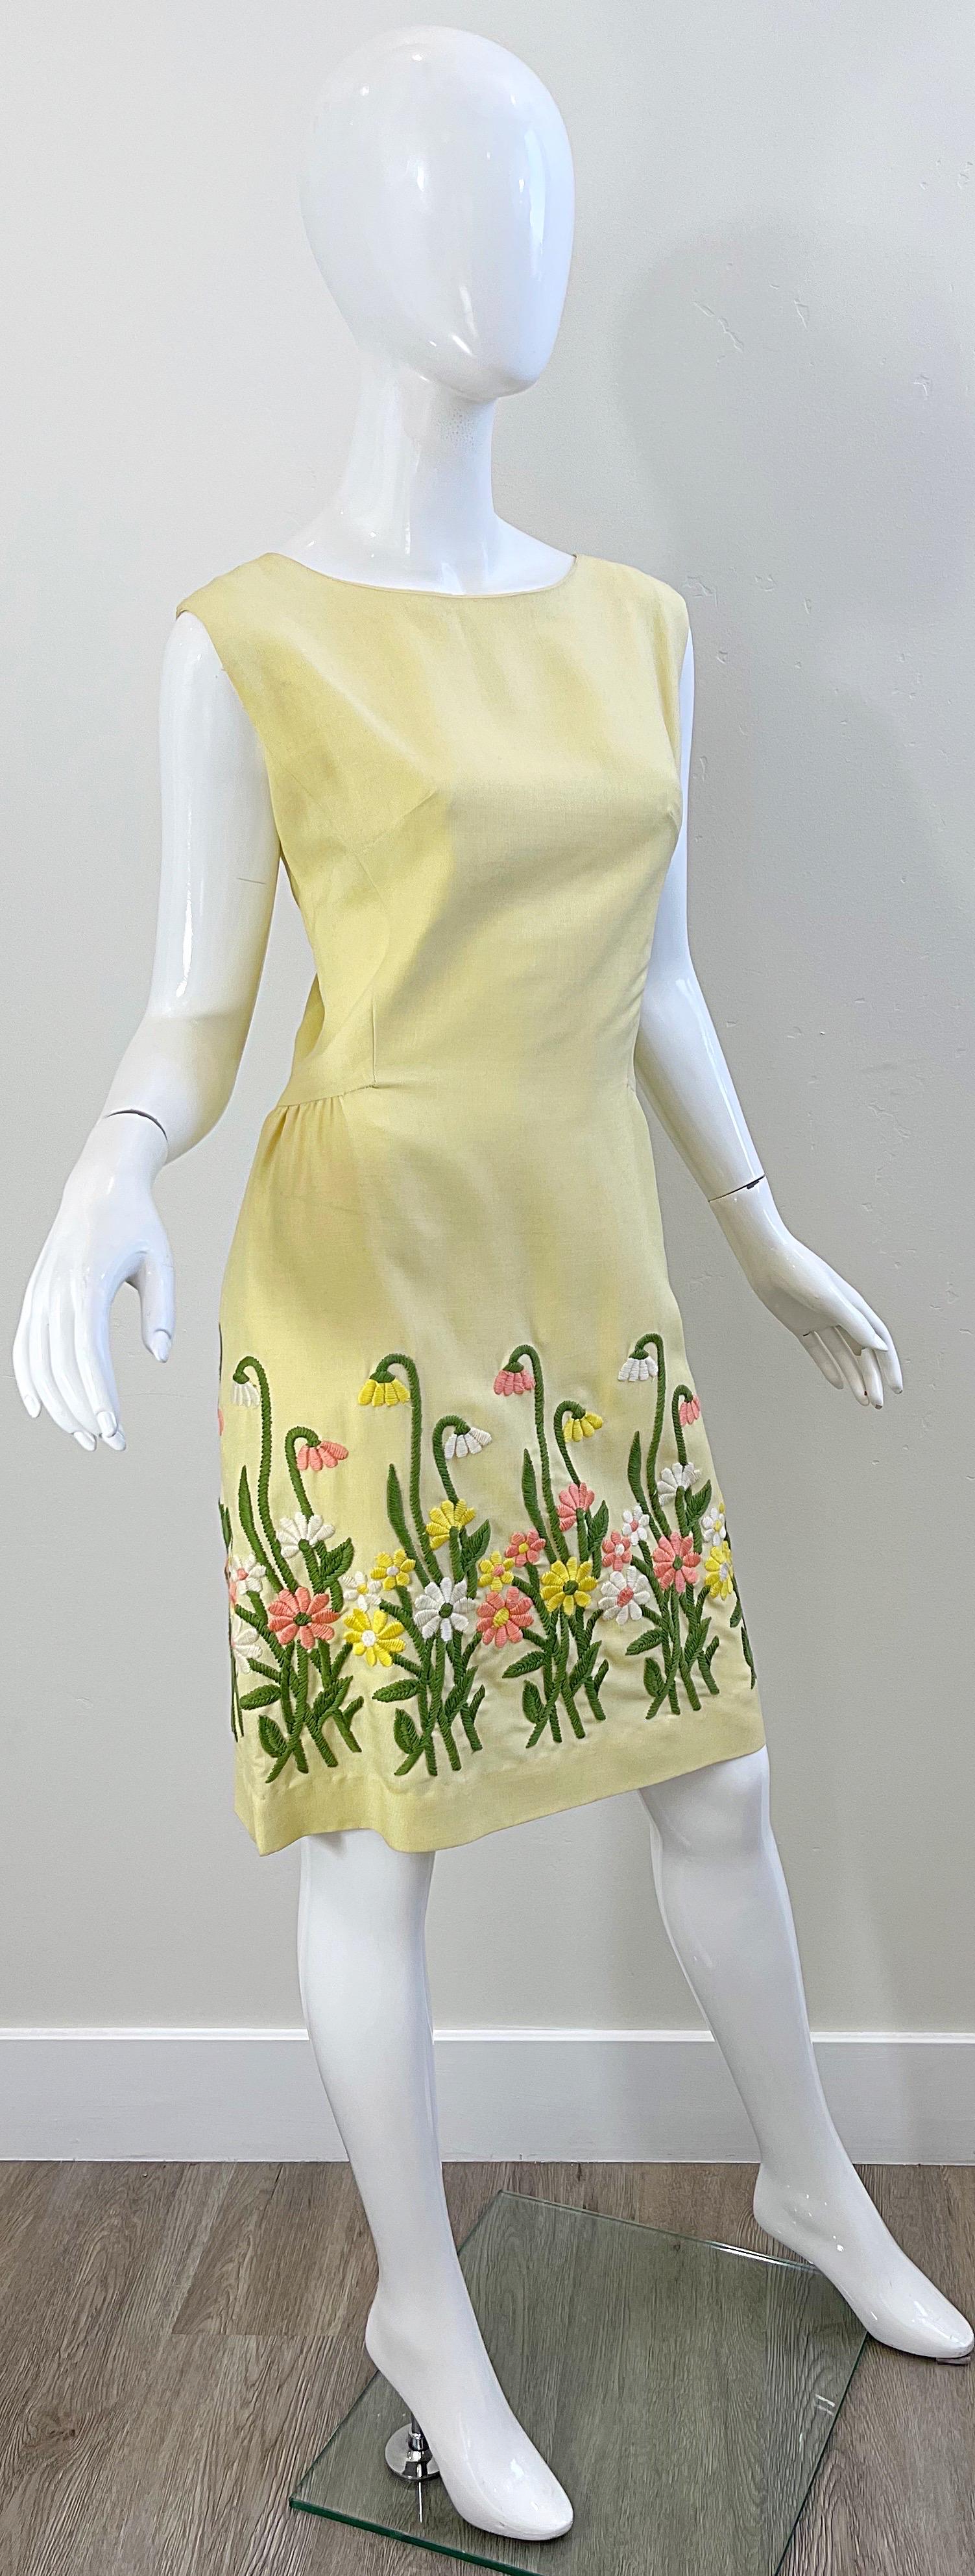 Women's Chic 1960s Pale Yellow Embroidered Flower Linen Vintage 60s Sheath Dress For Sale